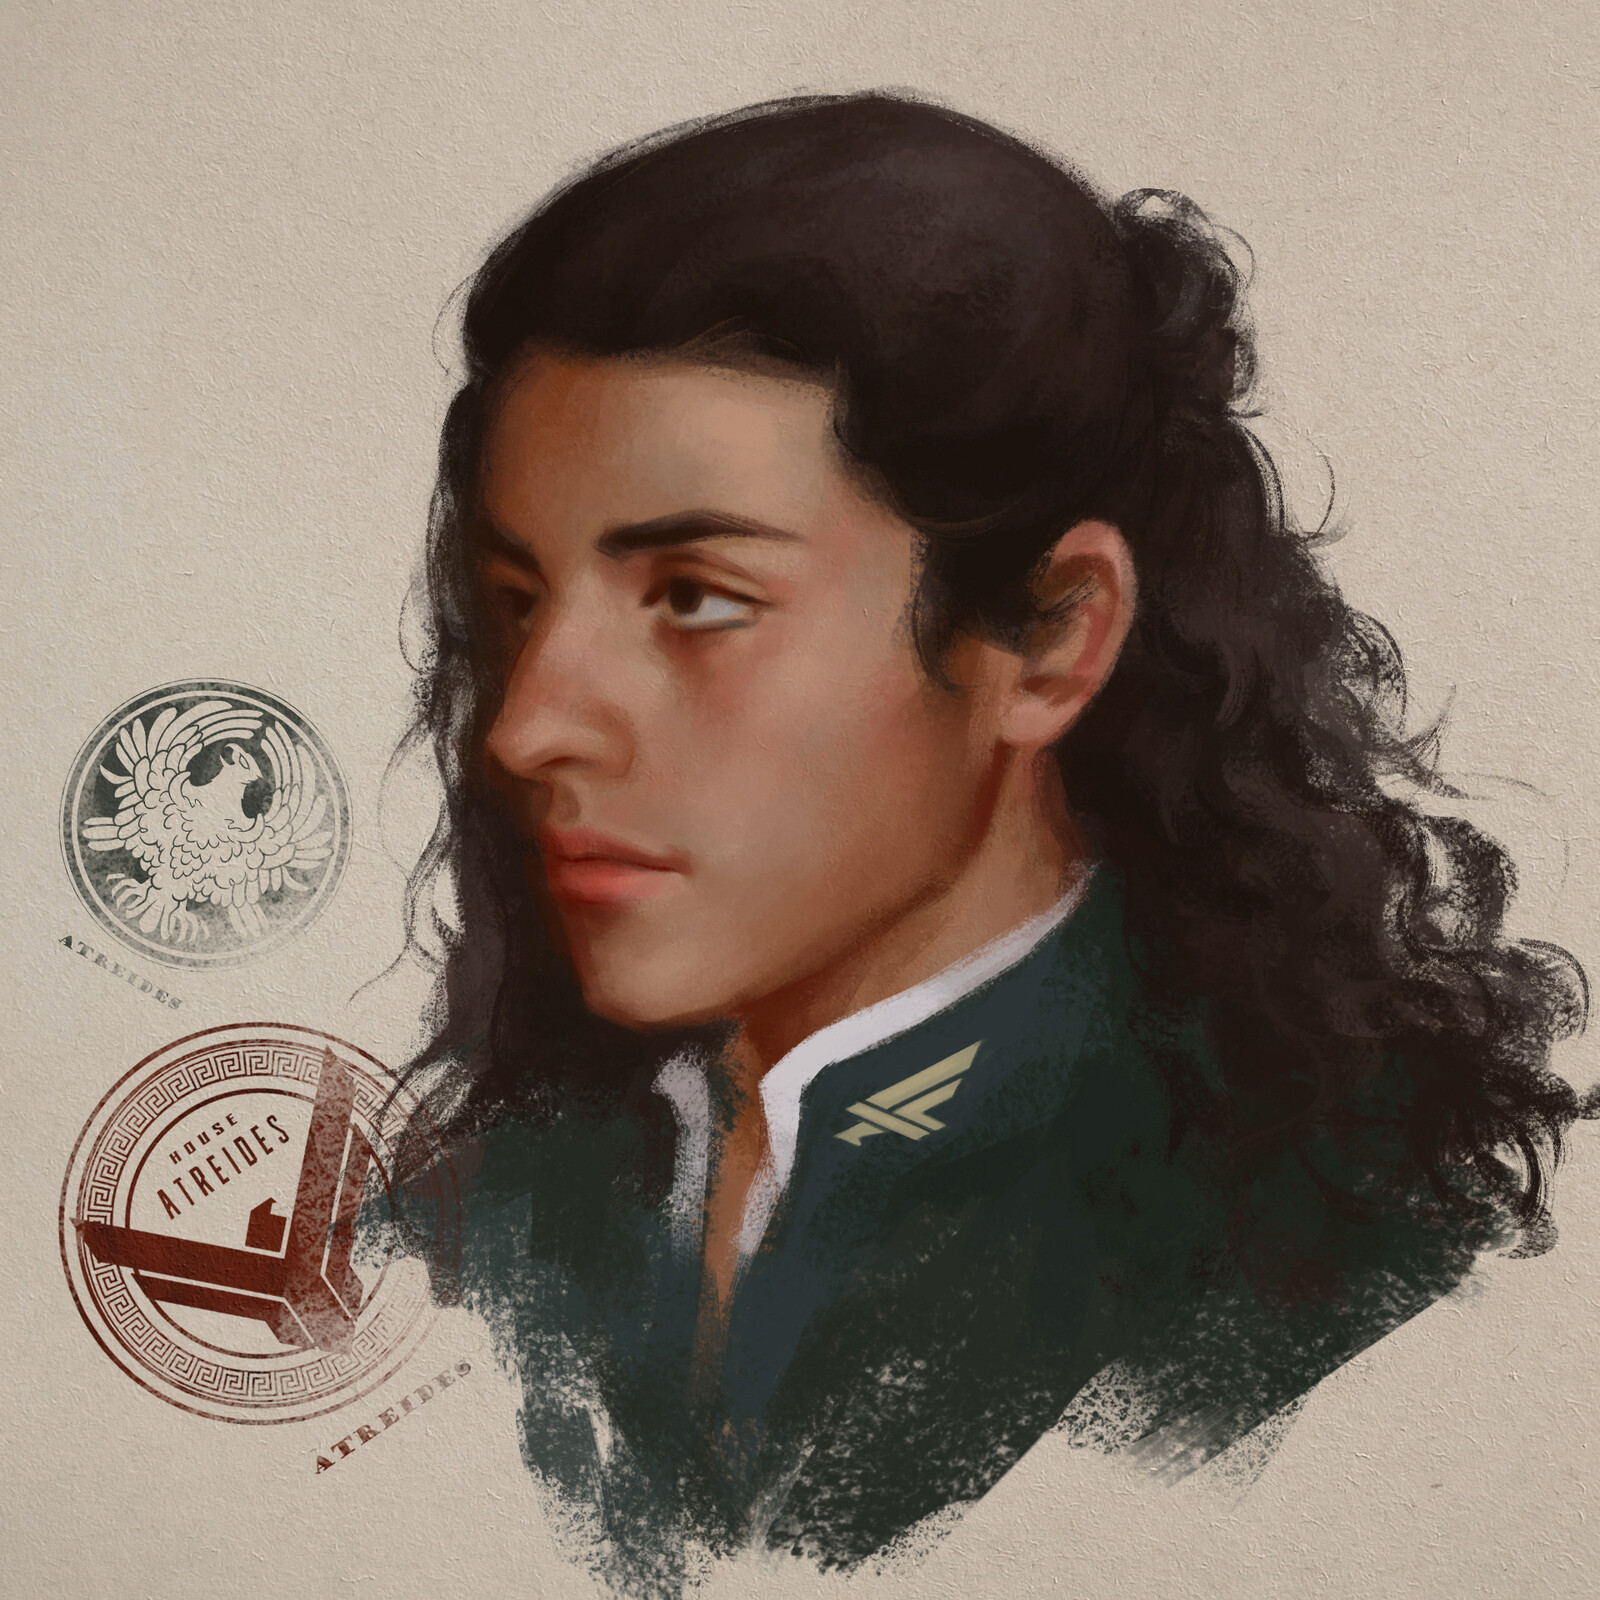 The young Duke Leto (a portrait sketch based on Oscar Isaac's photo)